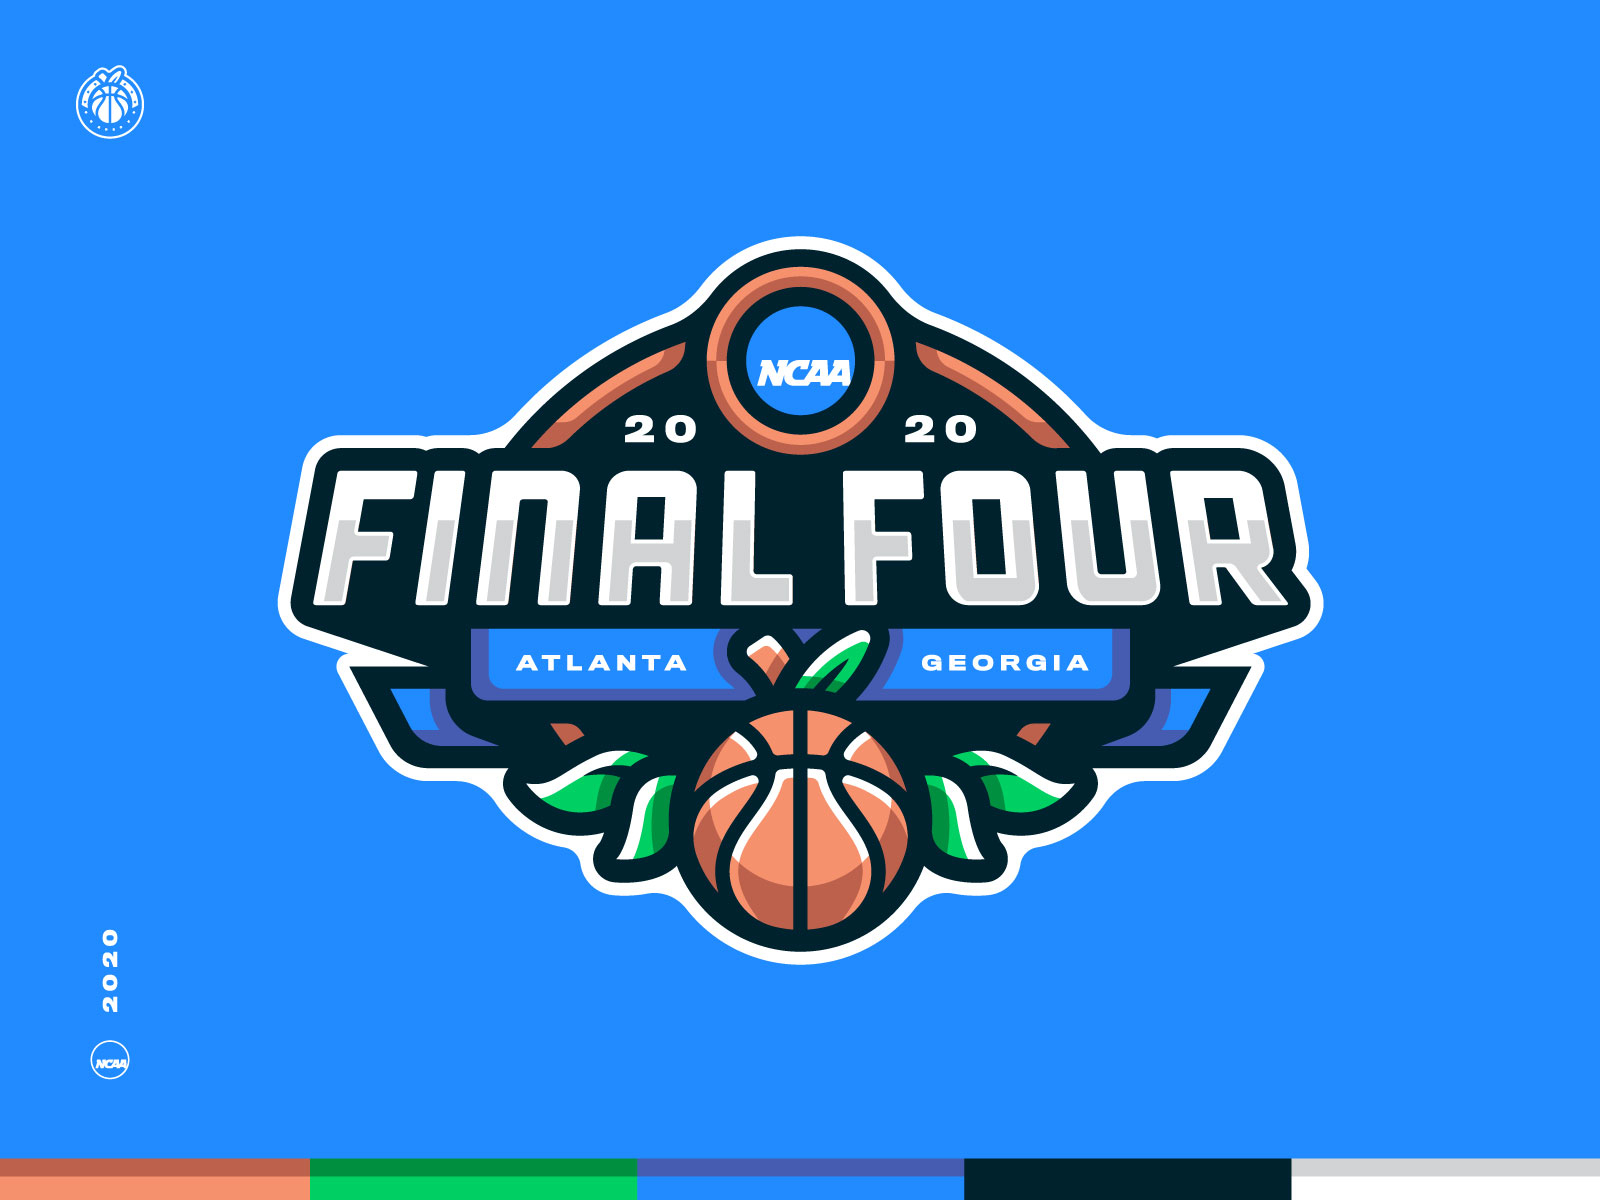 2020 Final Four Branding Concept by Grant O'Dell for Forte on Dribbble